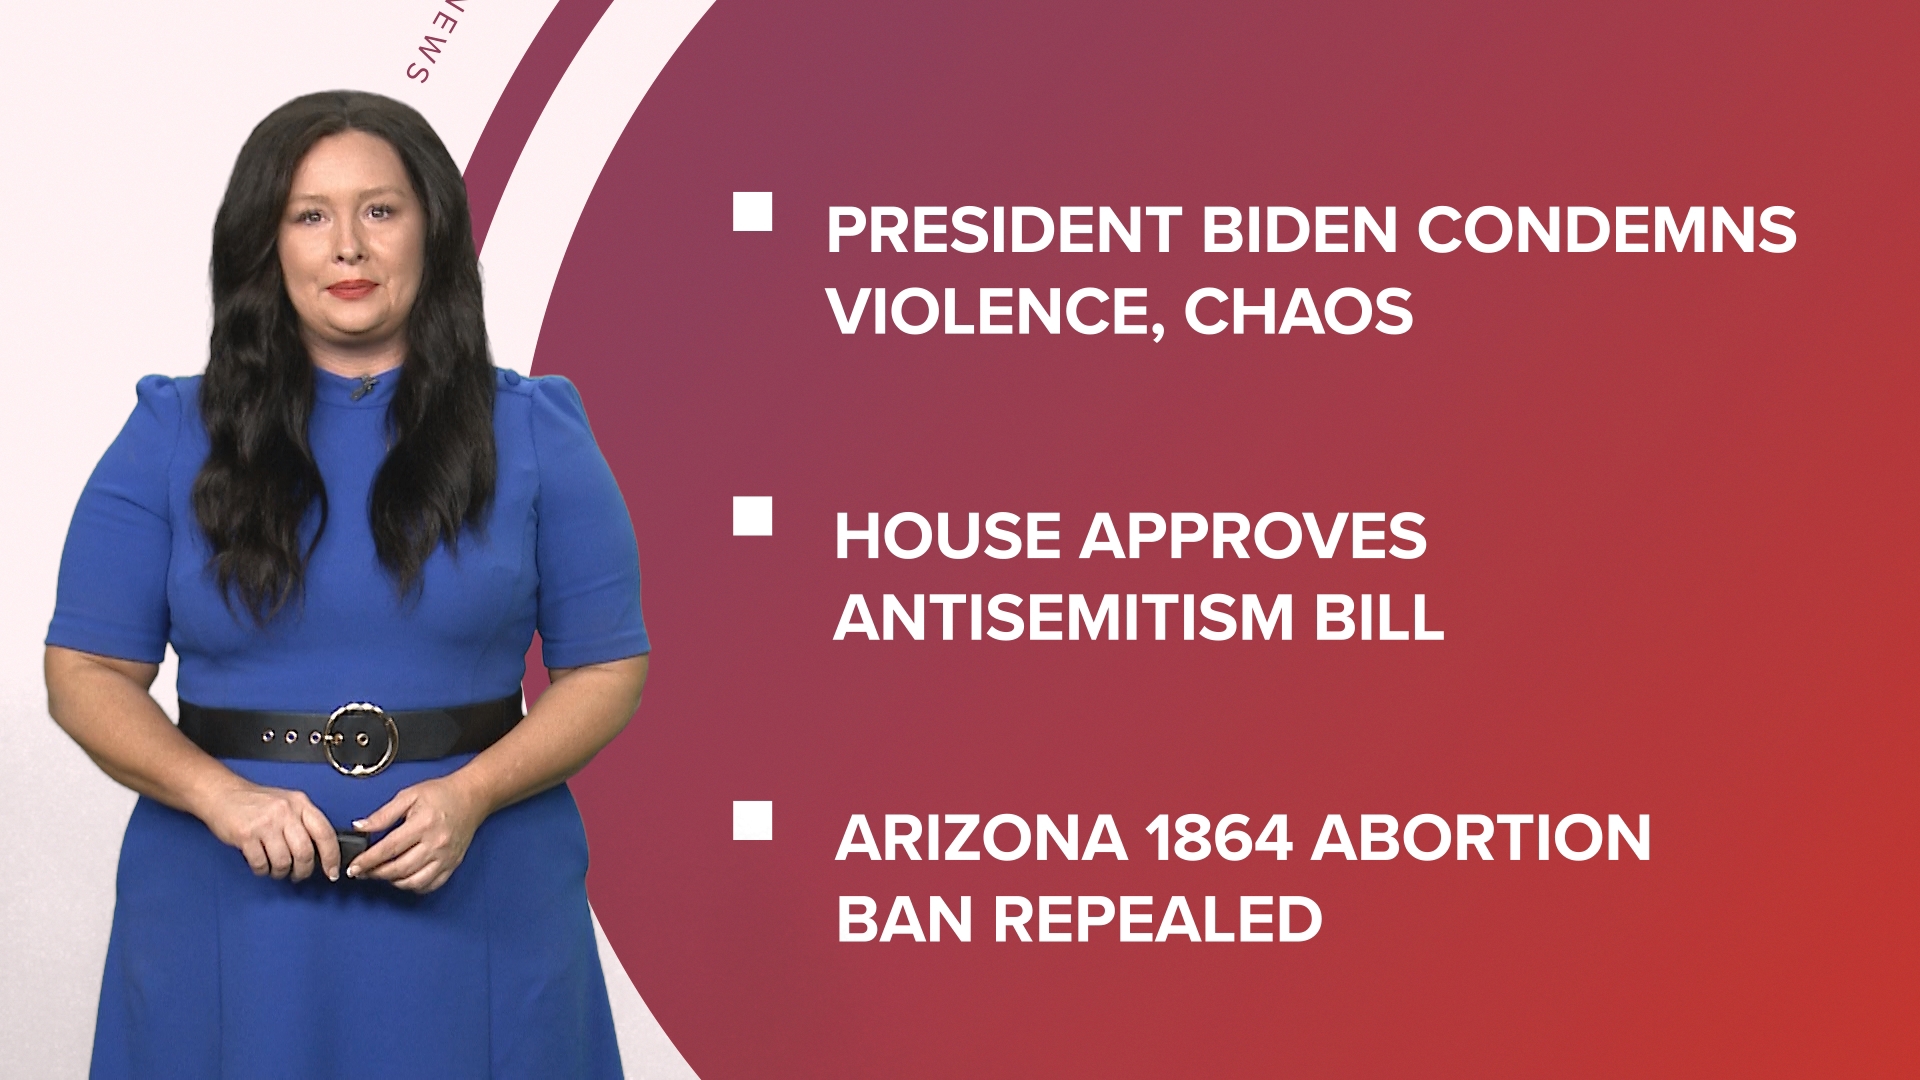 A look at what is happening in the news from an 1864 abortion law repealed in Arizona to Pres. Biden speaking out on protests and what to know about FAFSA delays.